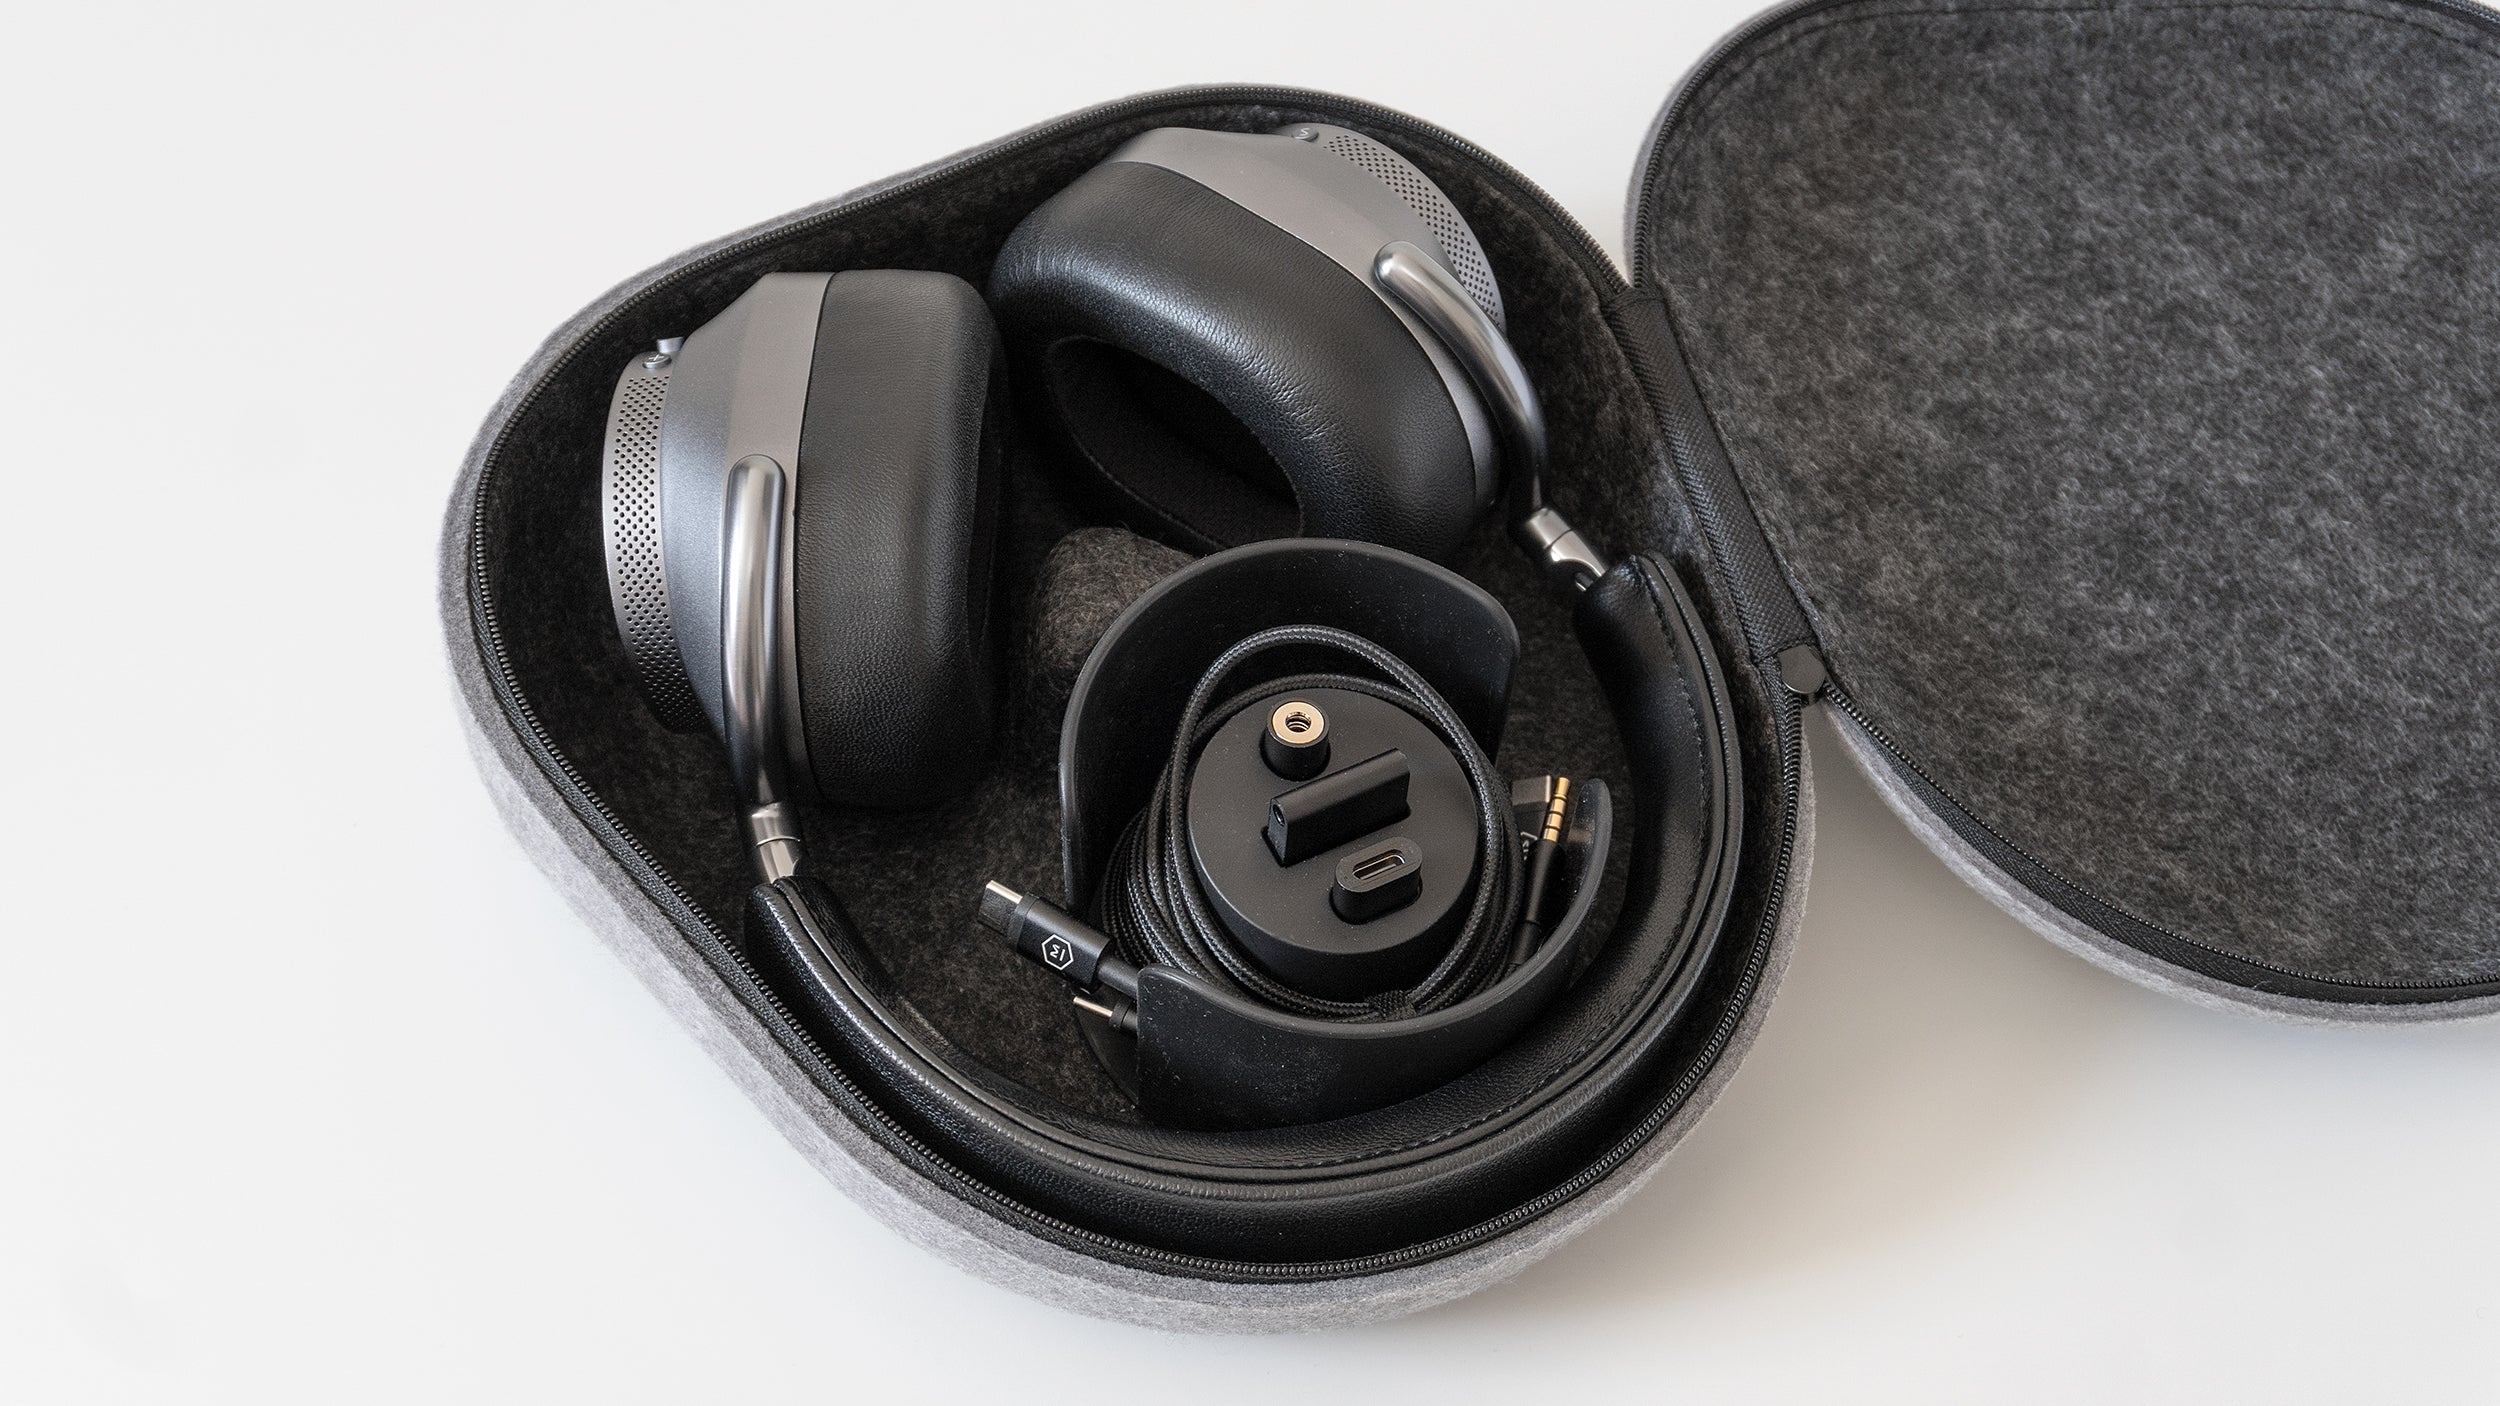 The Master & Dynamic MW75's carrying case includes accessories like a headphone cable, a charging cable, and an adaptor for aeroplane seat headphone jacks. (Photo: Andrew Liszewski | Gizmodo)